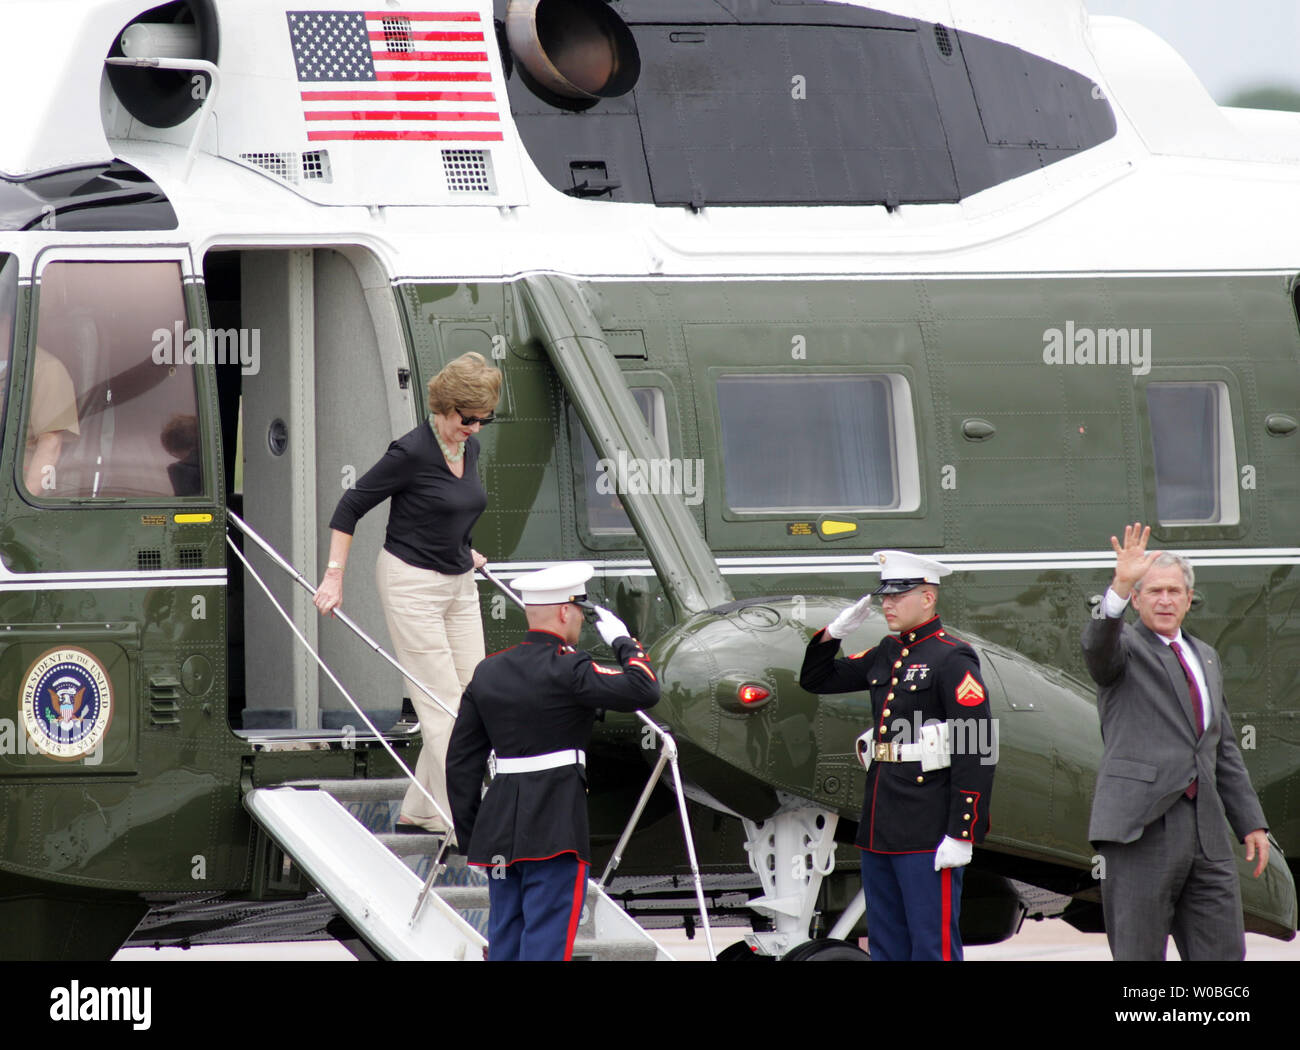 U.S. President George W. Bush and First Lady Laura Bush arrive at TSTC airport, aboard Marine One, in Waco, Texas on June 17, 2007. The Bush family spent the Fathers Day weekend at his ranch in Crawford, Texas and will travel back to Washington. (UPI Photo/Ron Russek II) Stock Photo